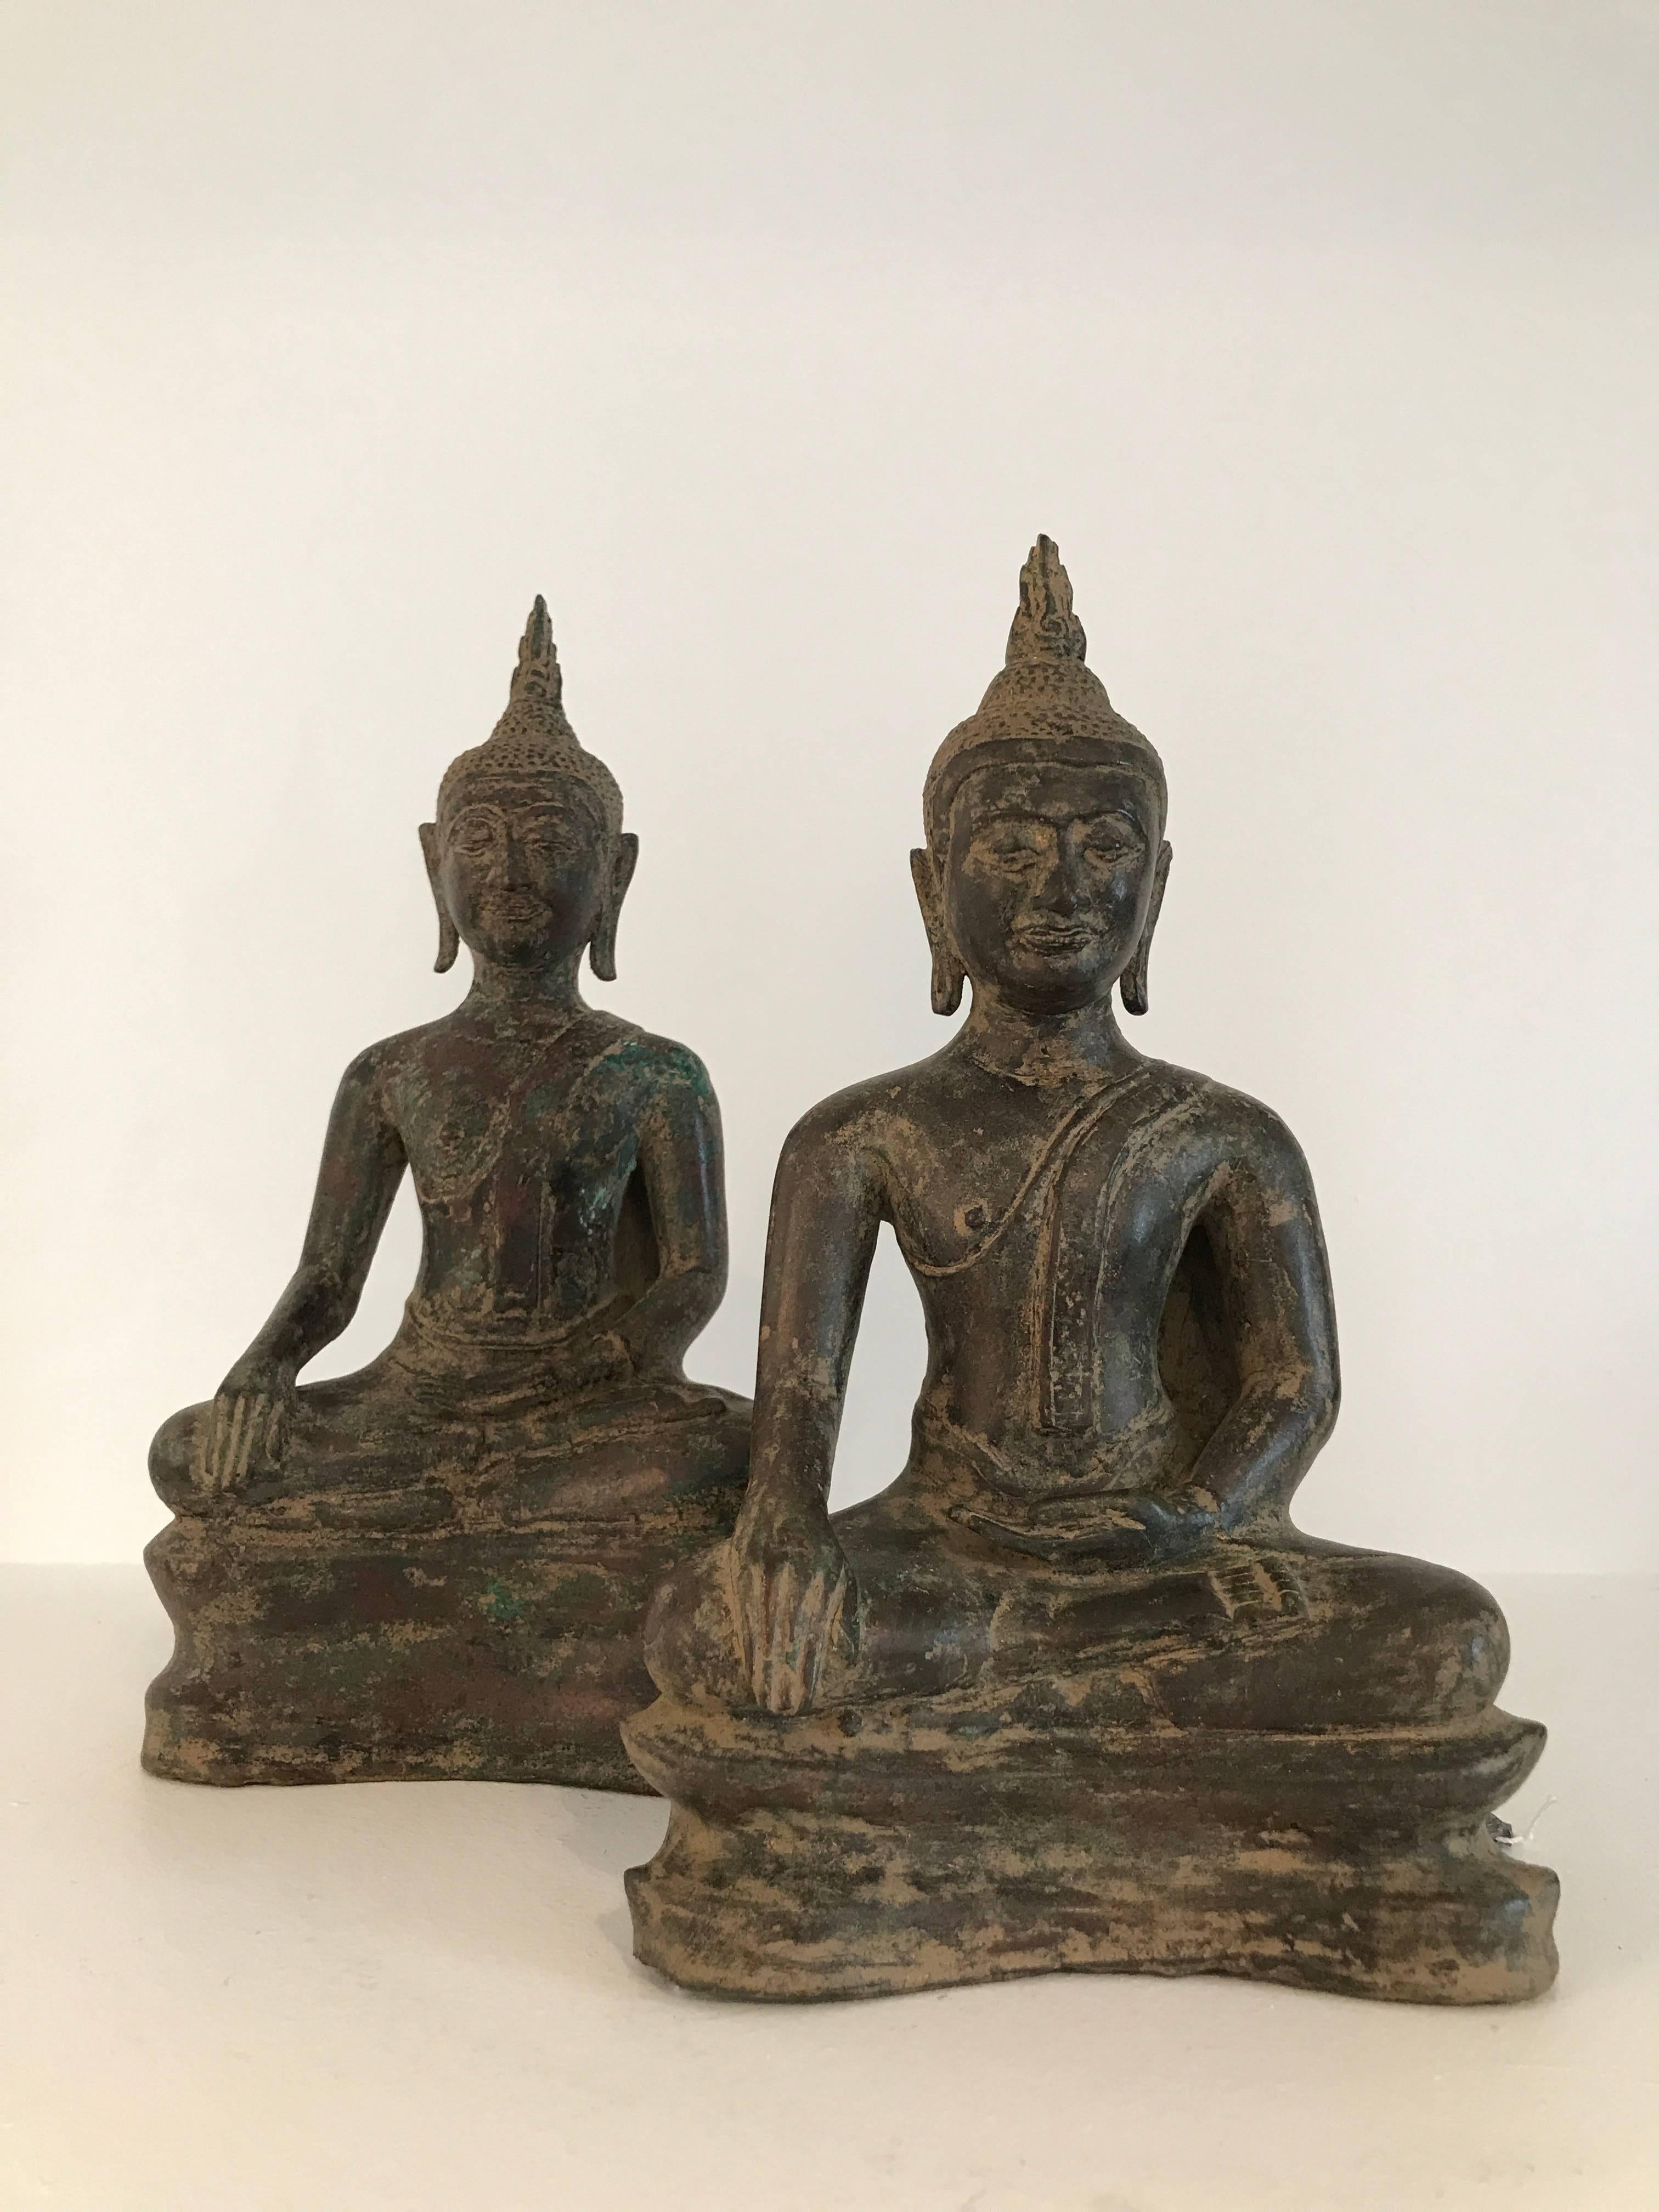 Polished Very Exceptional Almost Identical Pair of Bronze Buddhas For Sale